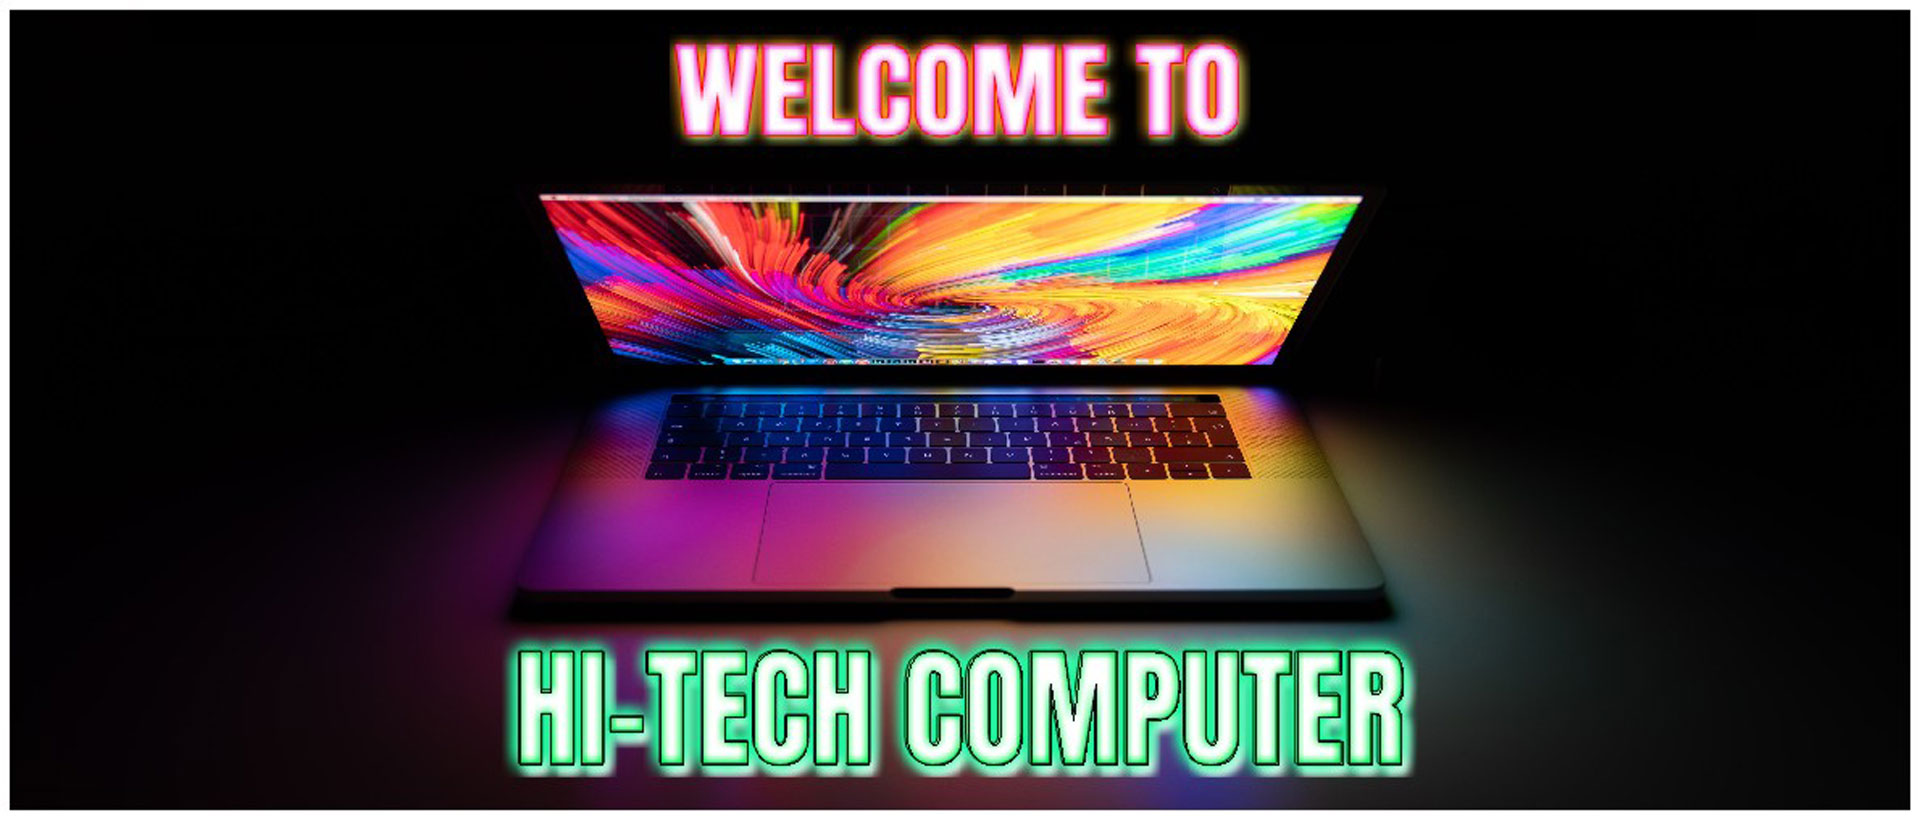 Welcome to Hitech Computer